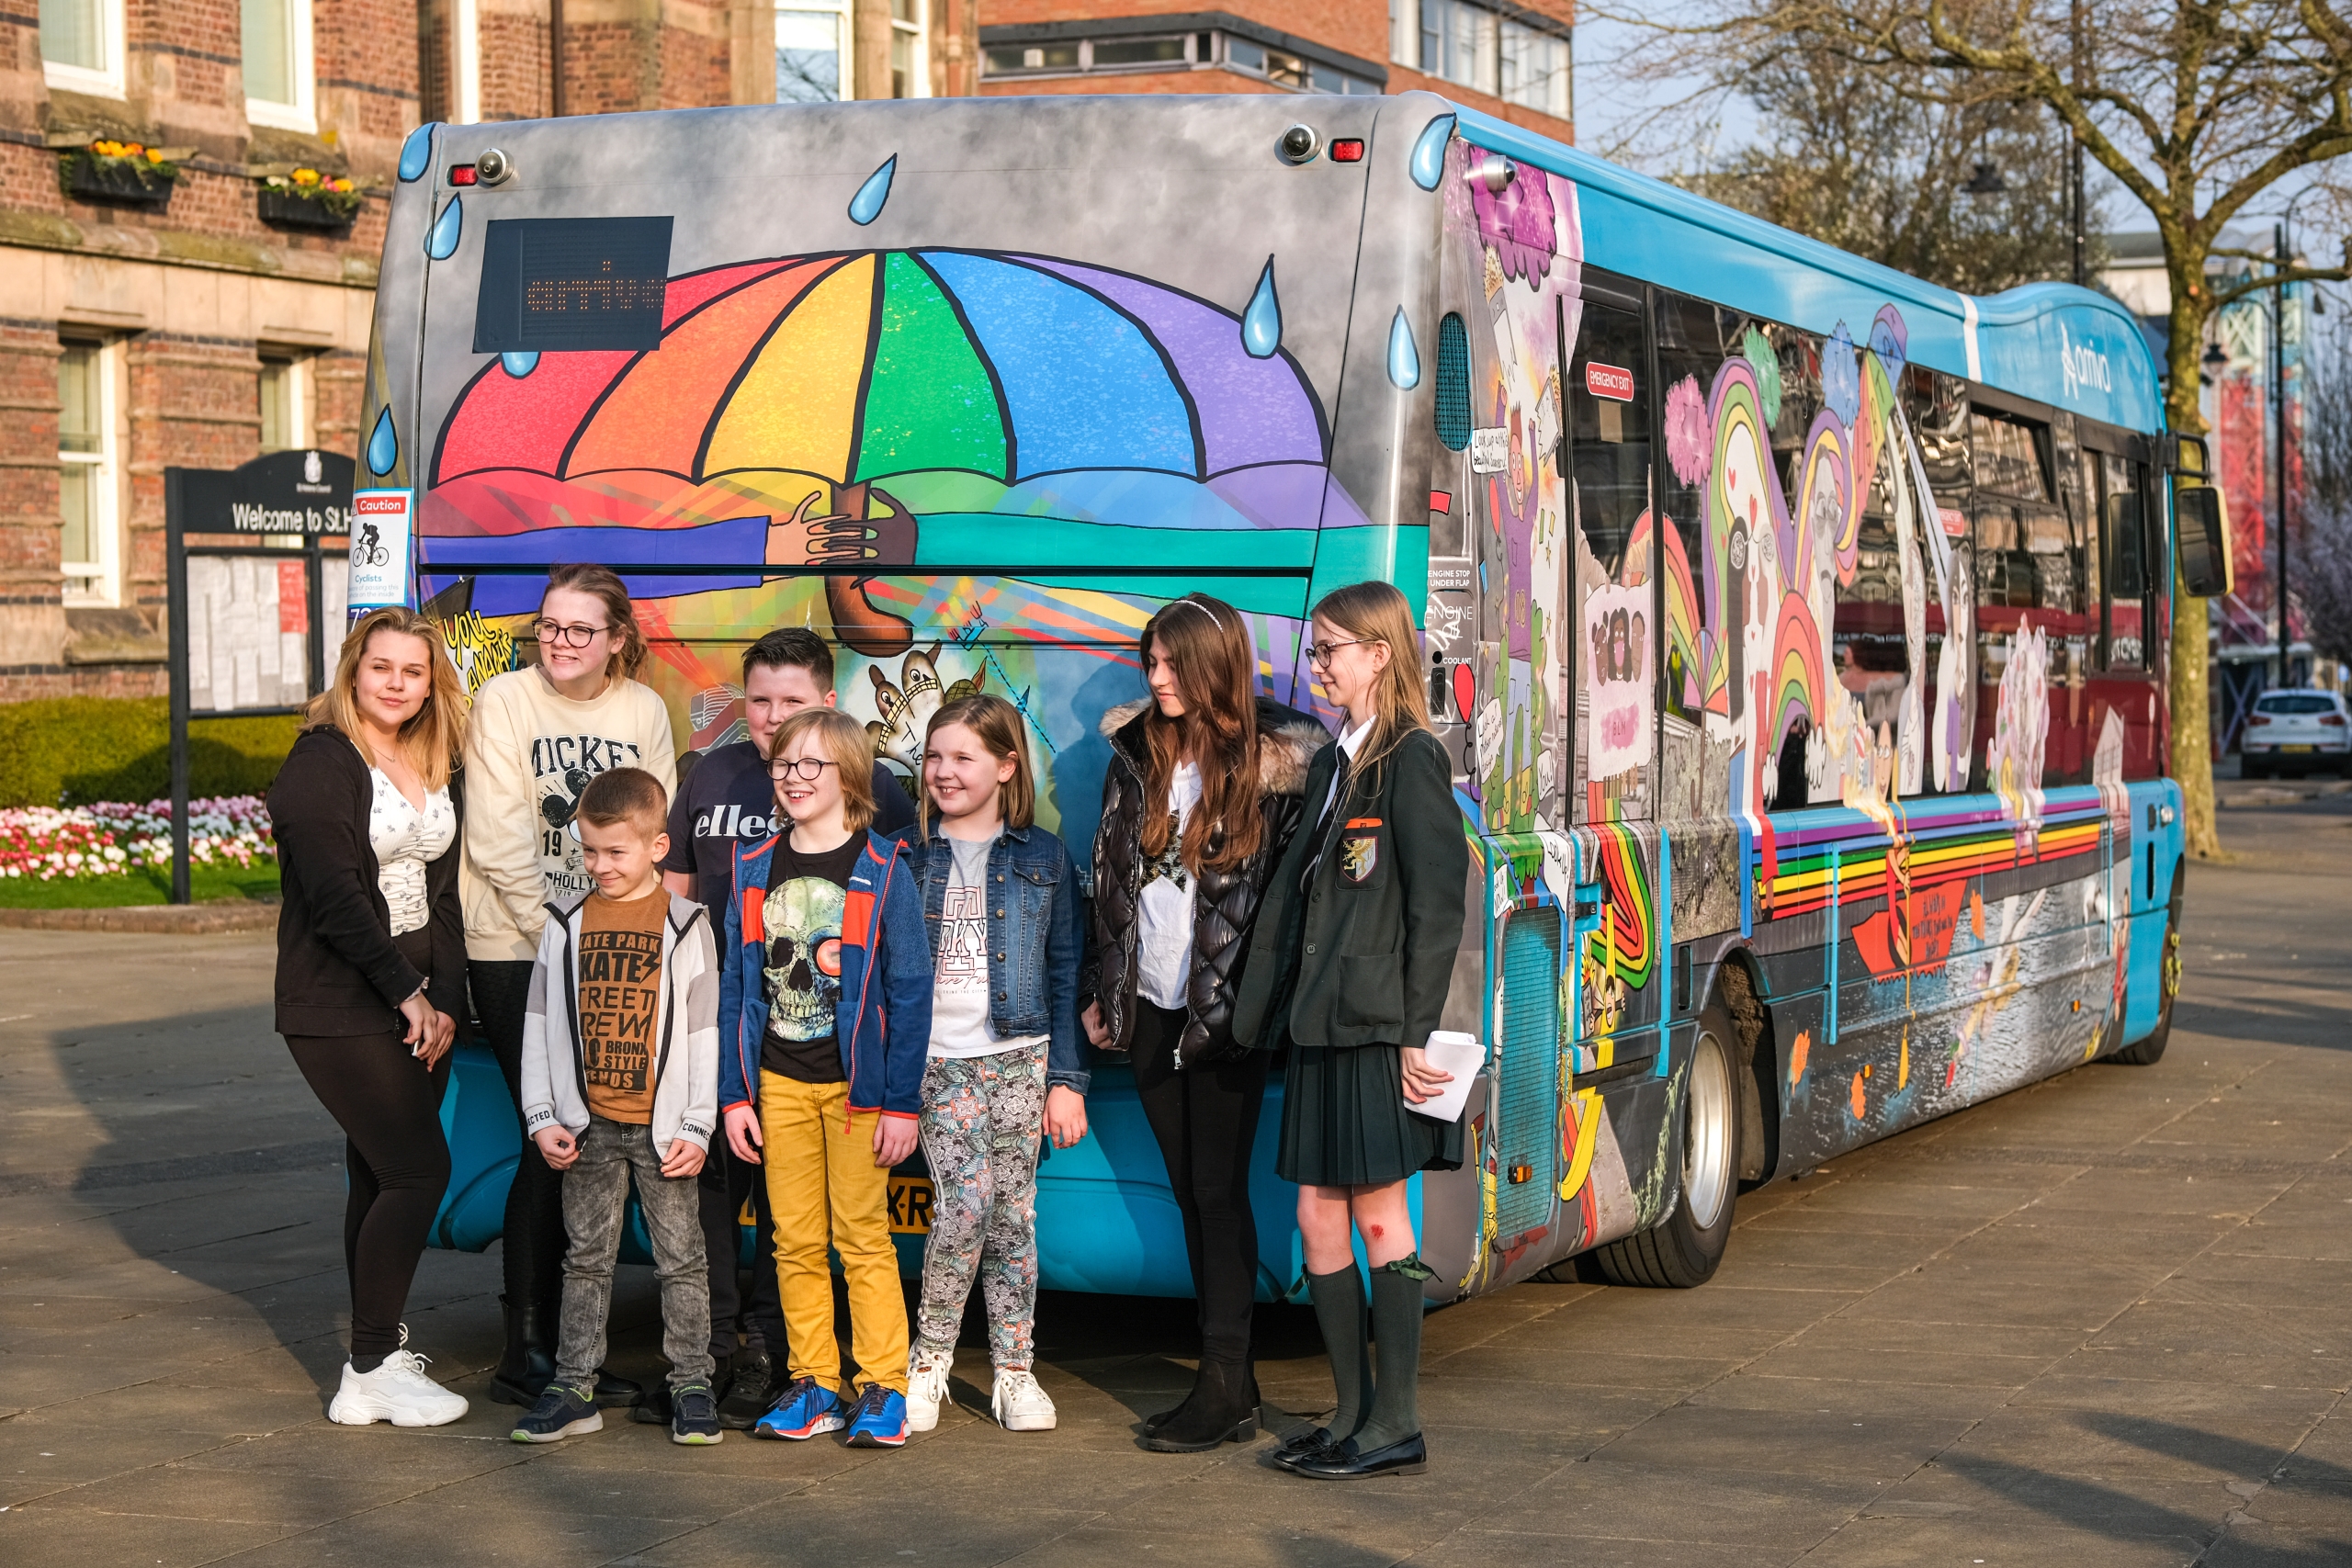 ARRIVA bus featuring colourful art over exterior with young people stood in front of bus